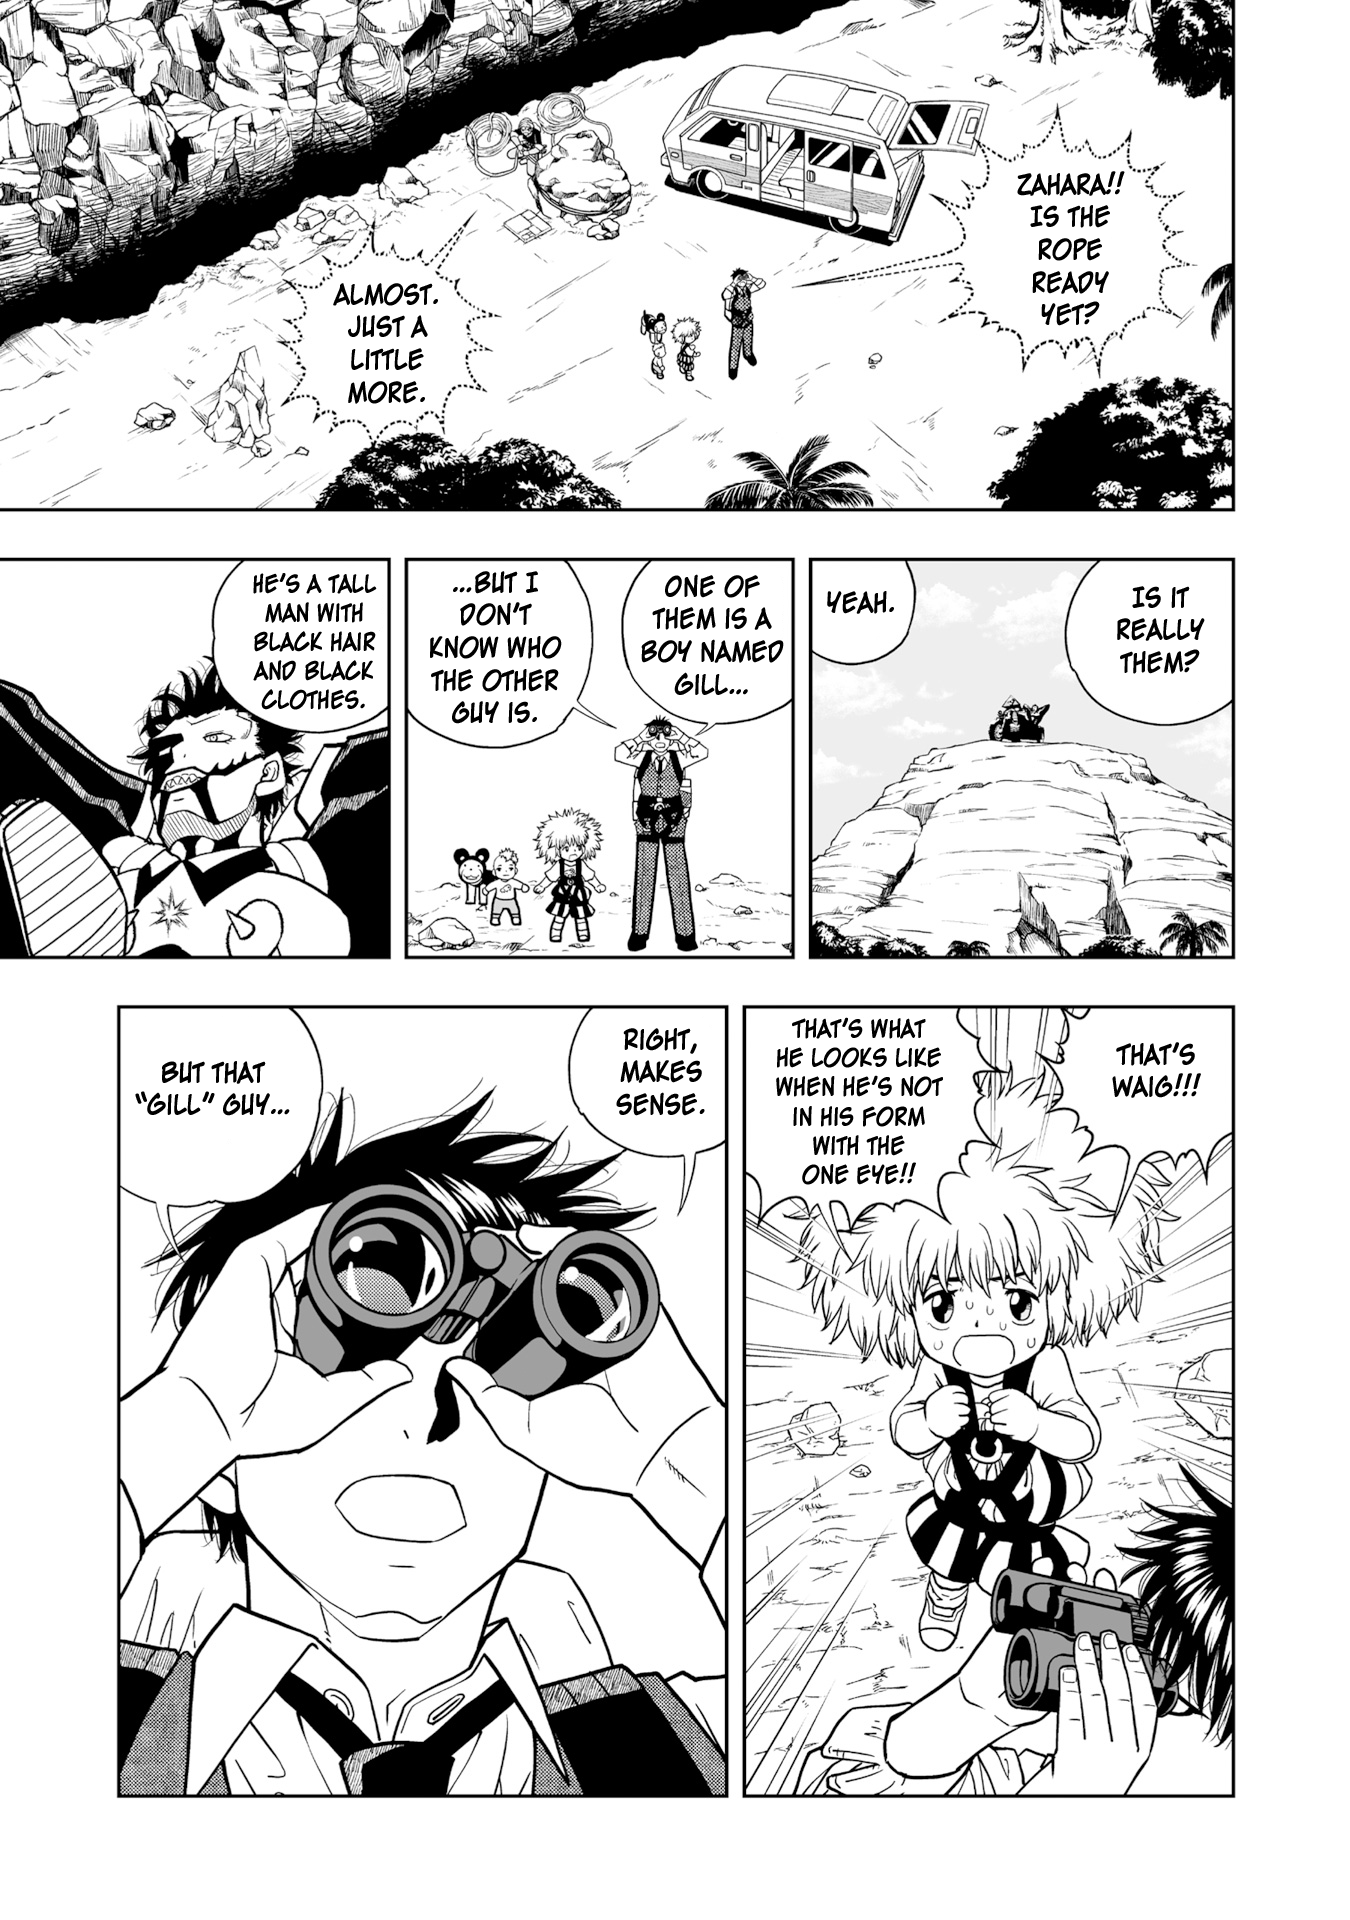 Zatch Bell! 2 Vol.1 Chapter 4 - Picture 3